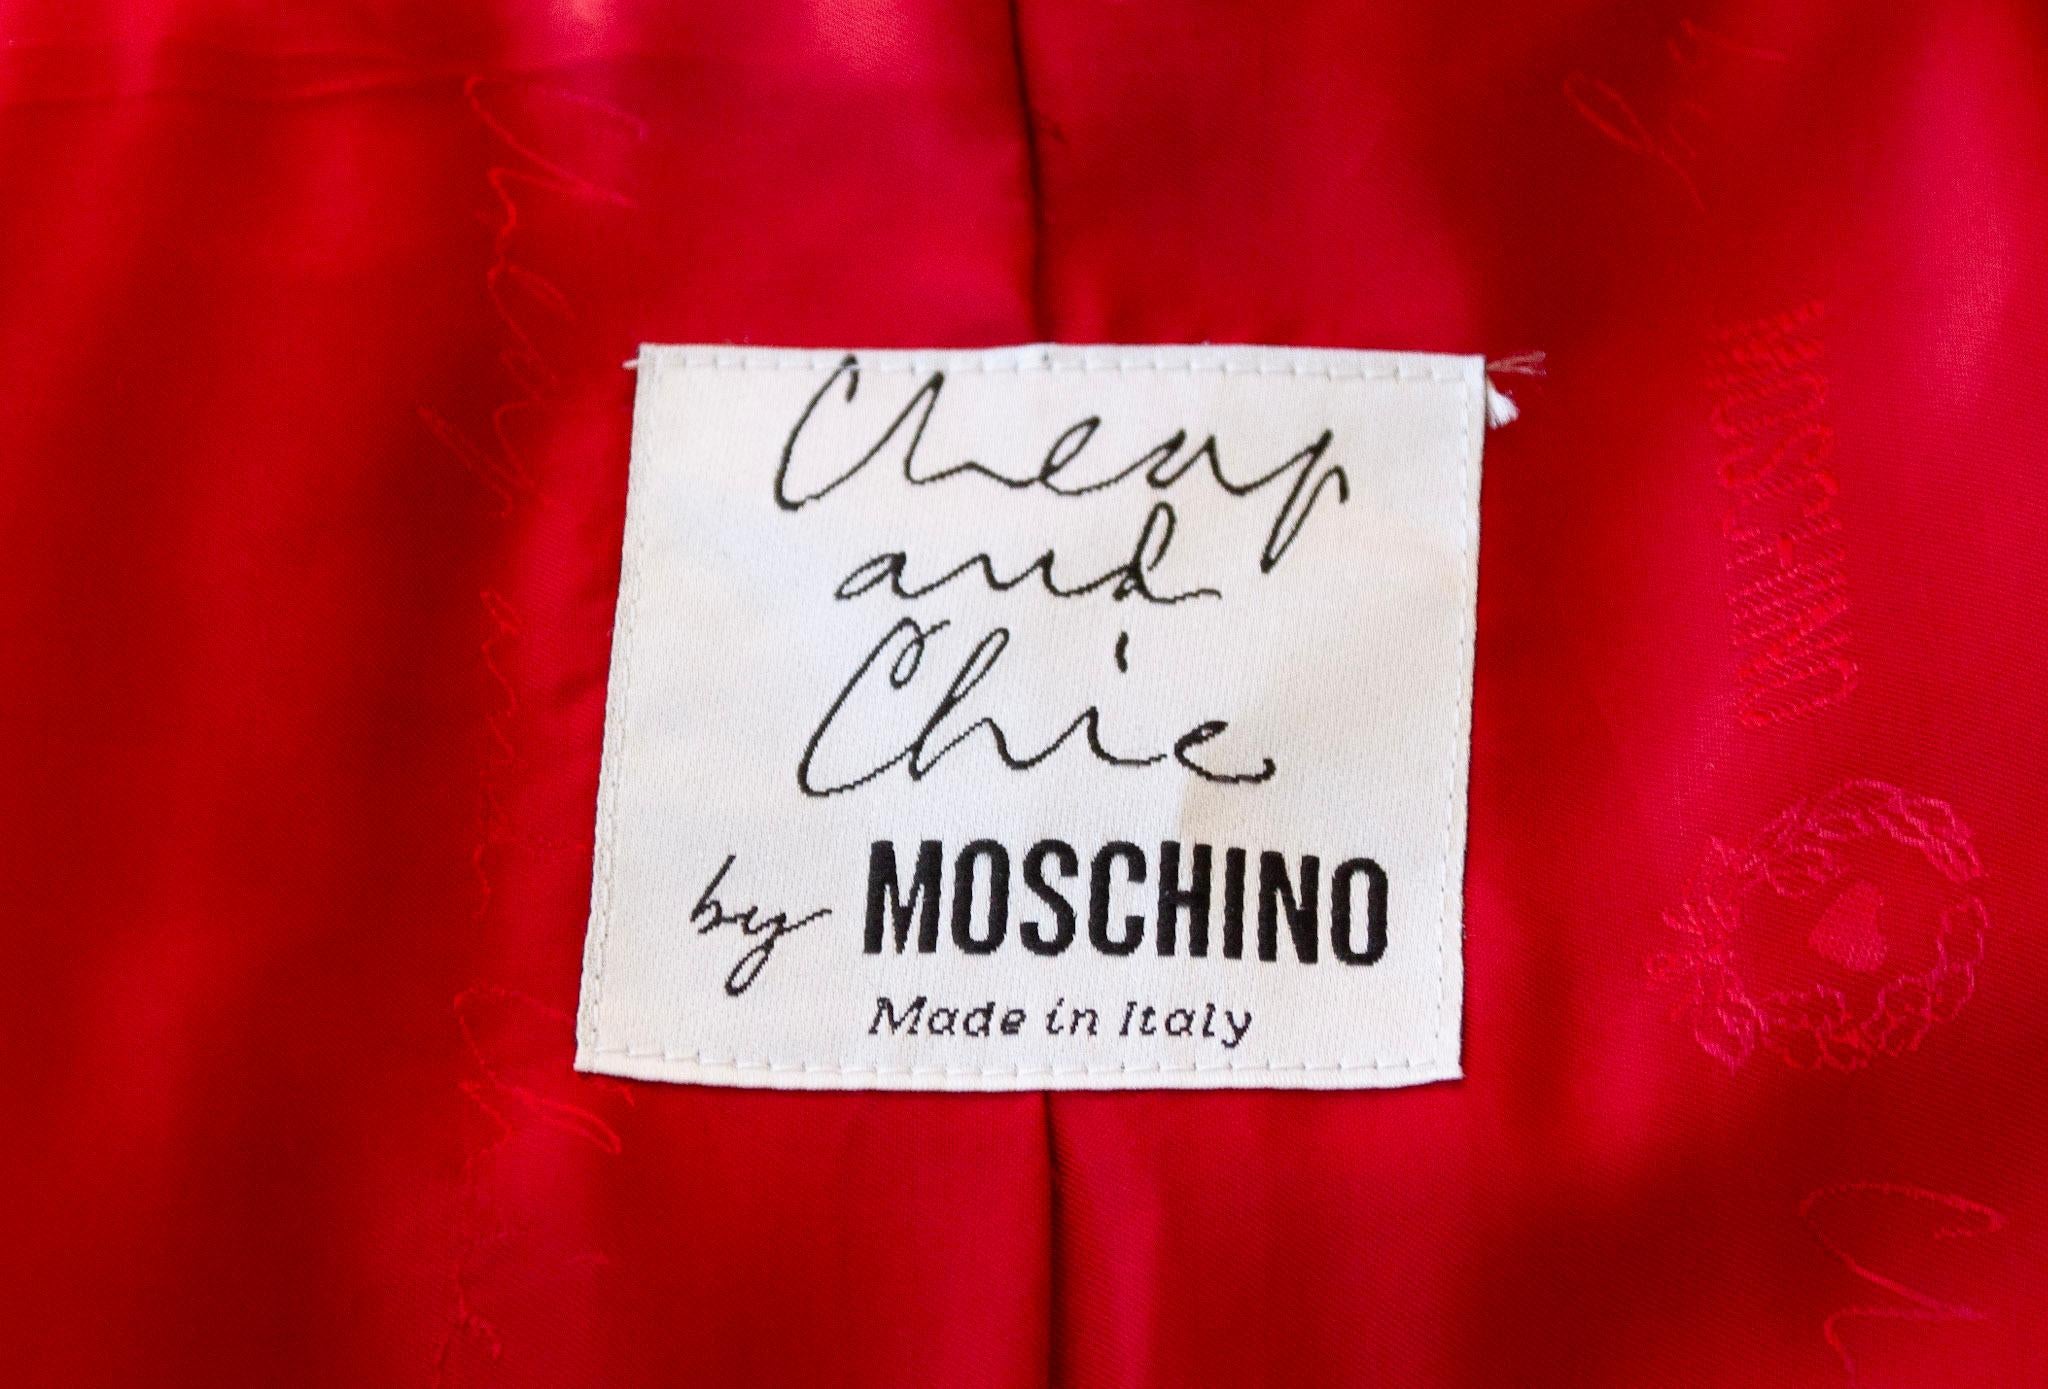 Cheap and Chic by MOSCHINO  6